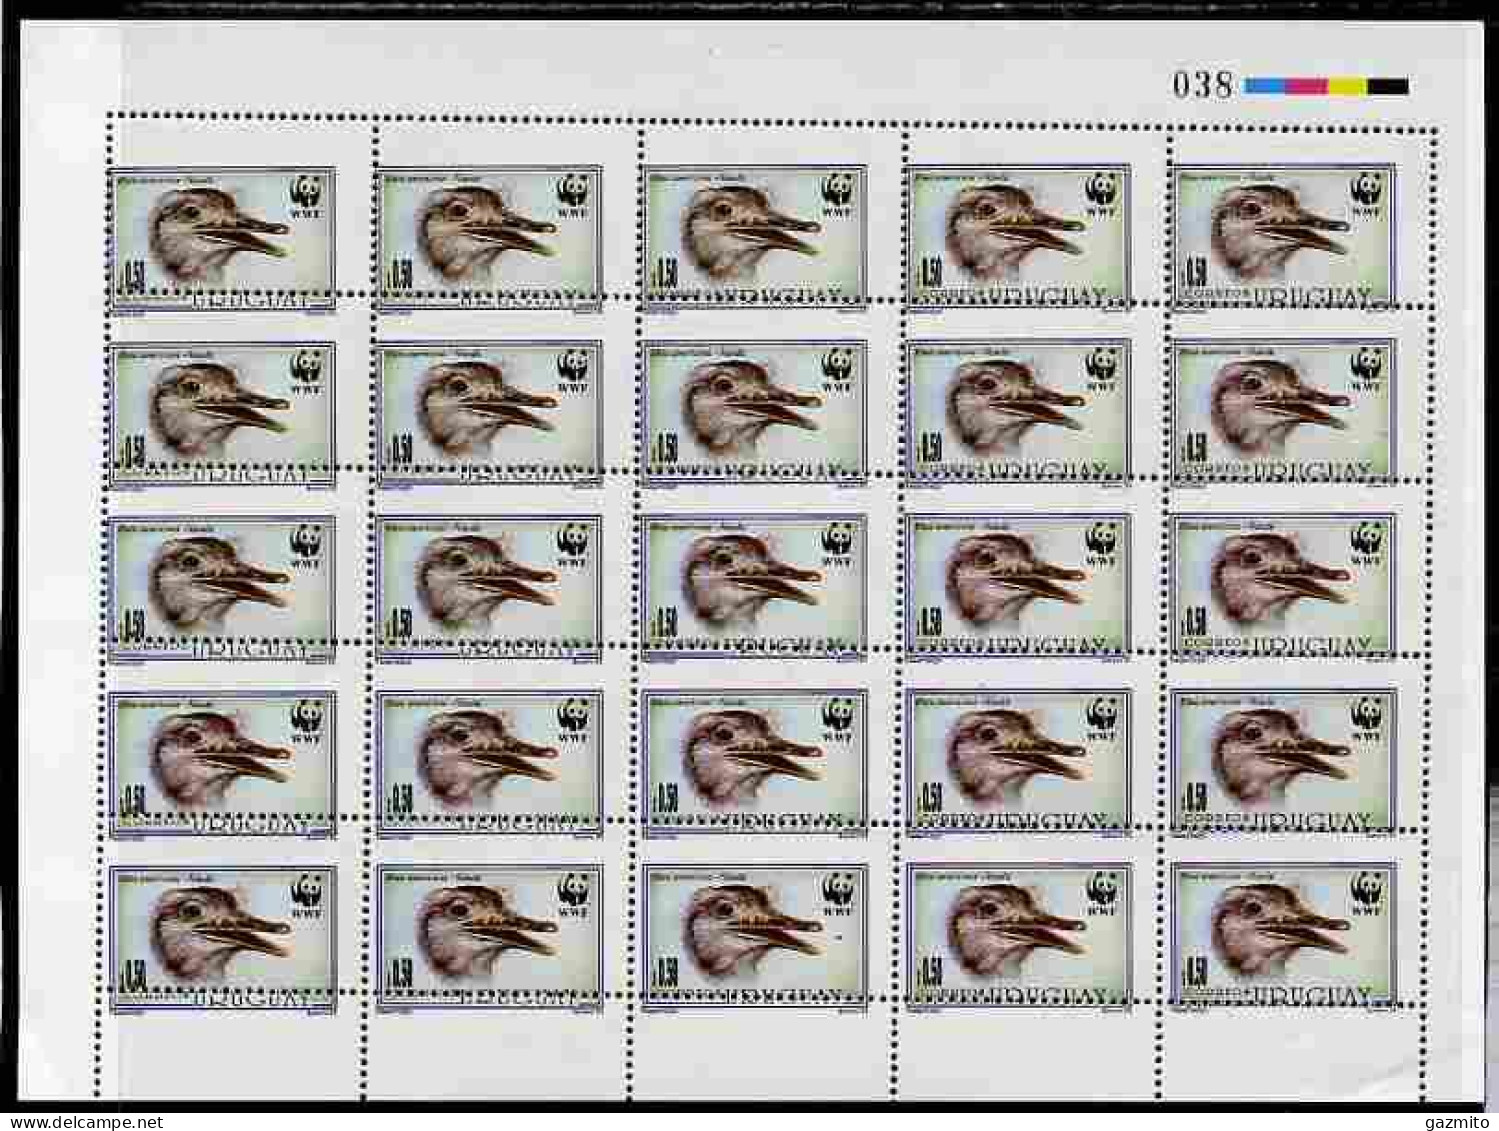 Uruguay 1993, WWF The Great Rhea 50c Complete Sheet Of 25 With Perforations Misplaced Obliquely, Sheetlet - Unused Stamps